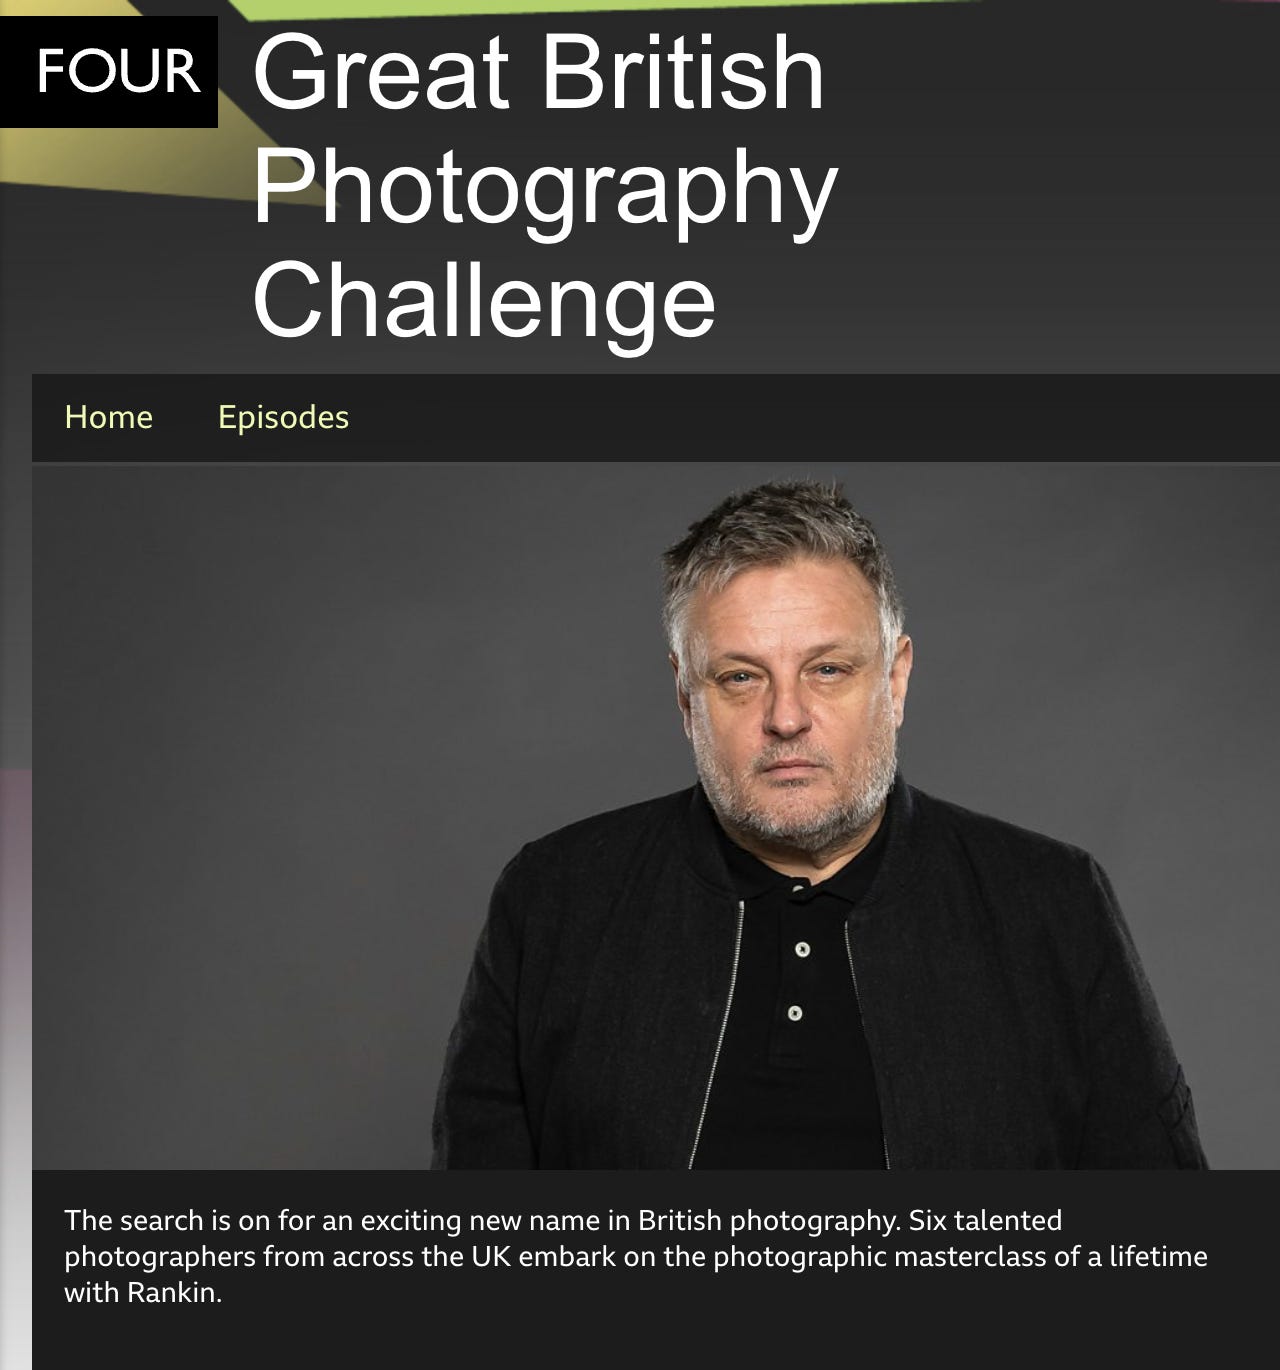 BBC programme page for Great British Photography Challenge with photo of photographer Rankin